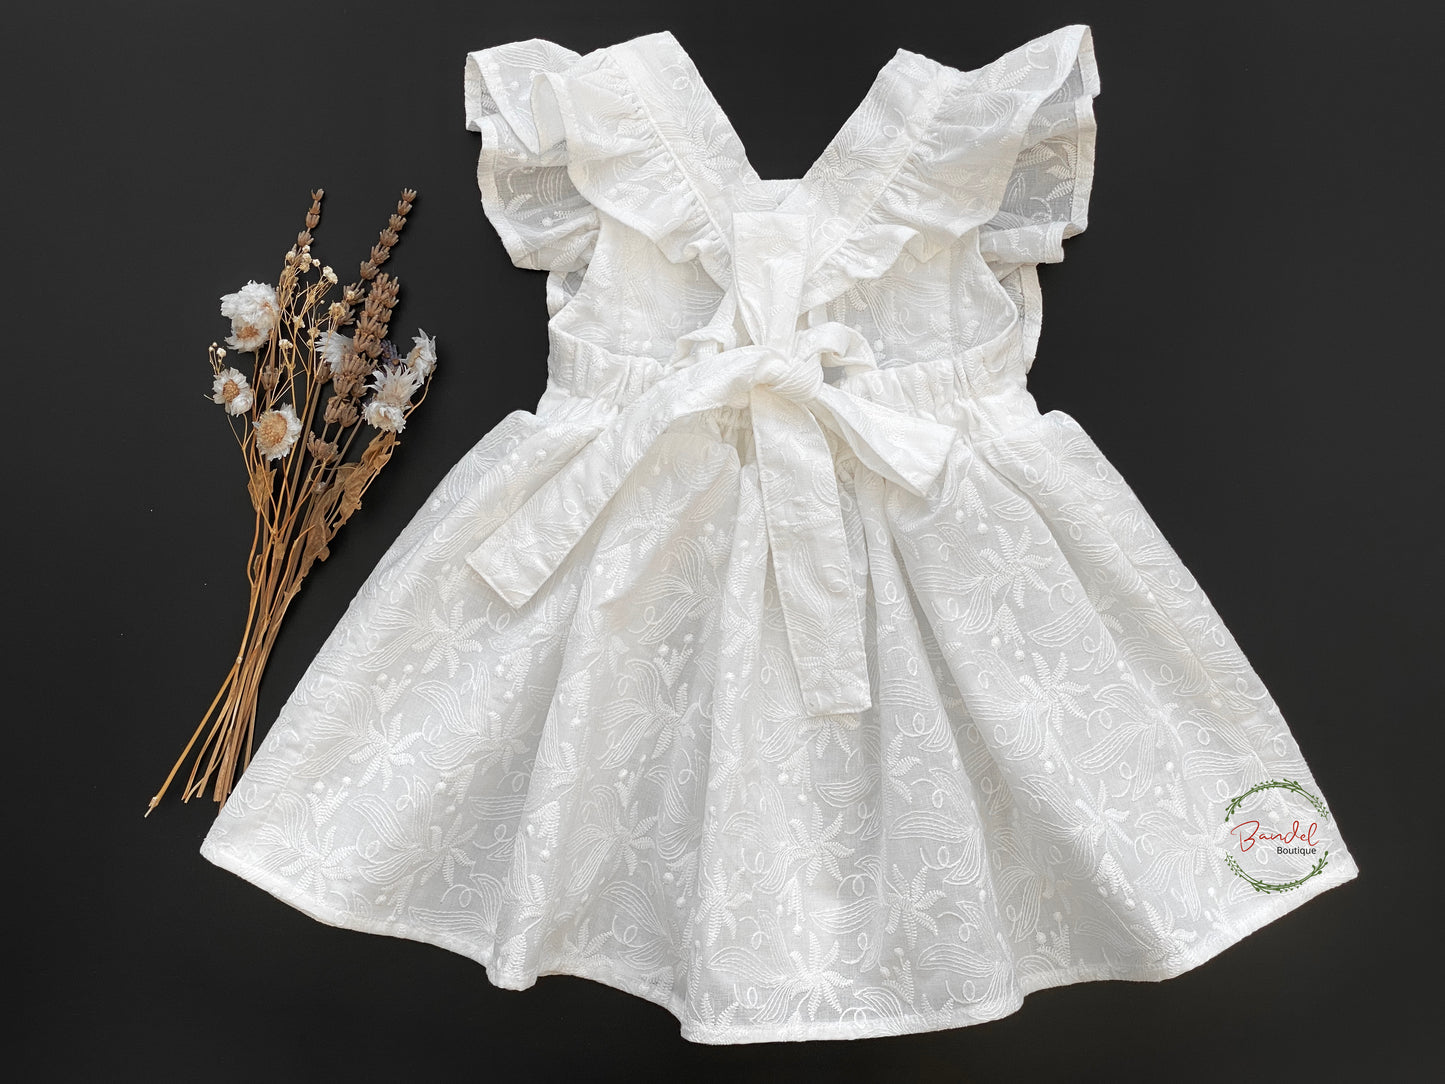 Embroidery Ivory Vintage dress is perfect for flower girls. It's made of cotton with an ivory hue and features exquisitely detailed embroidery, adjustable straps, ruffled sleeves, and a gathered skirt. The dress is sure to make your flower girl look beautiful on your special day.